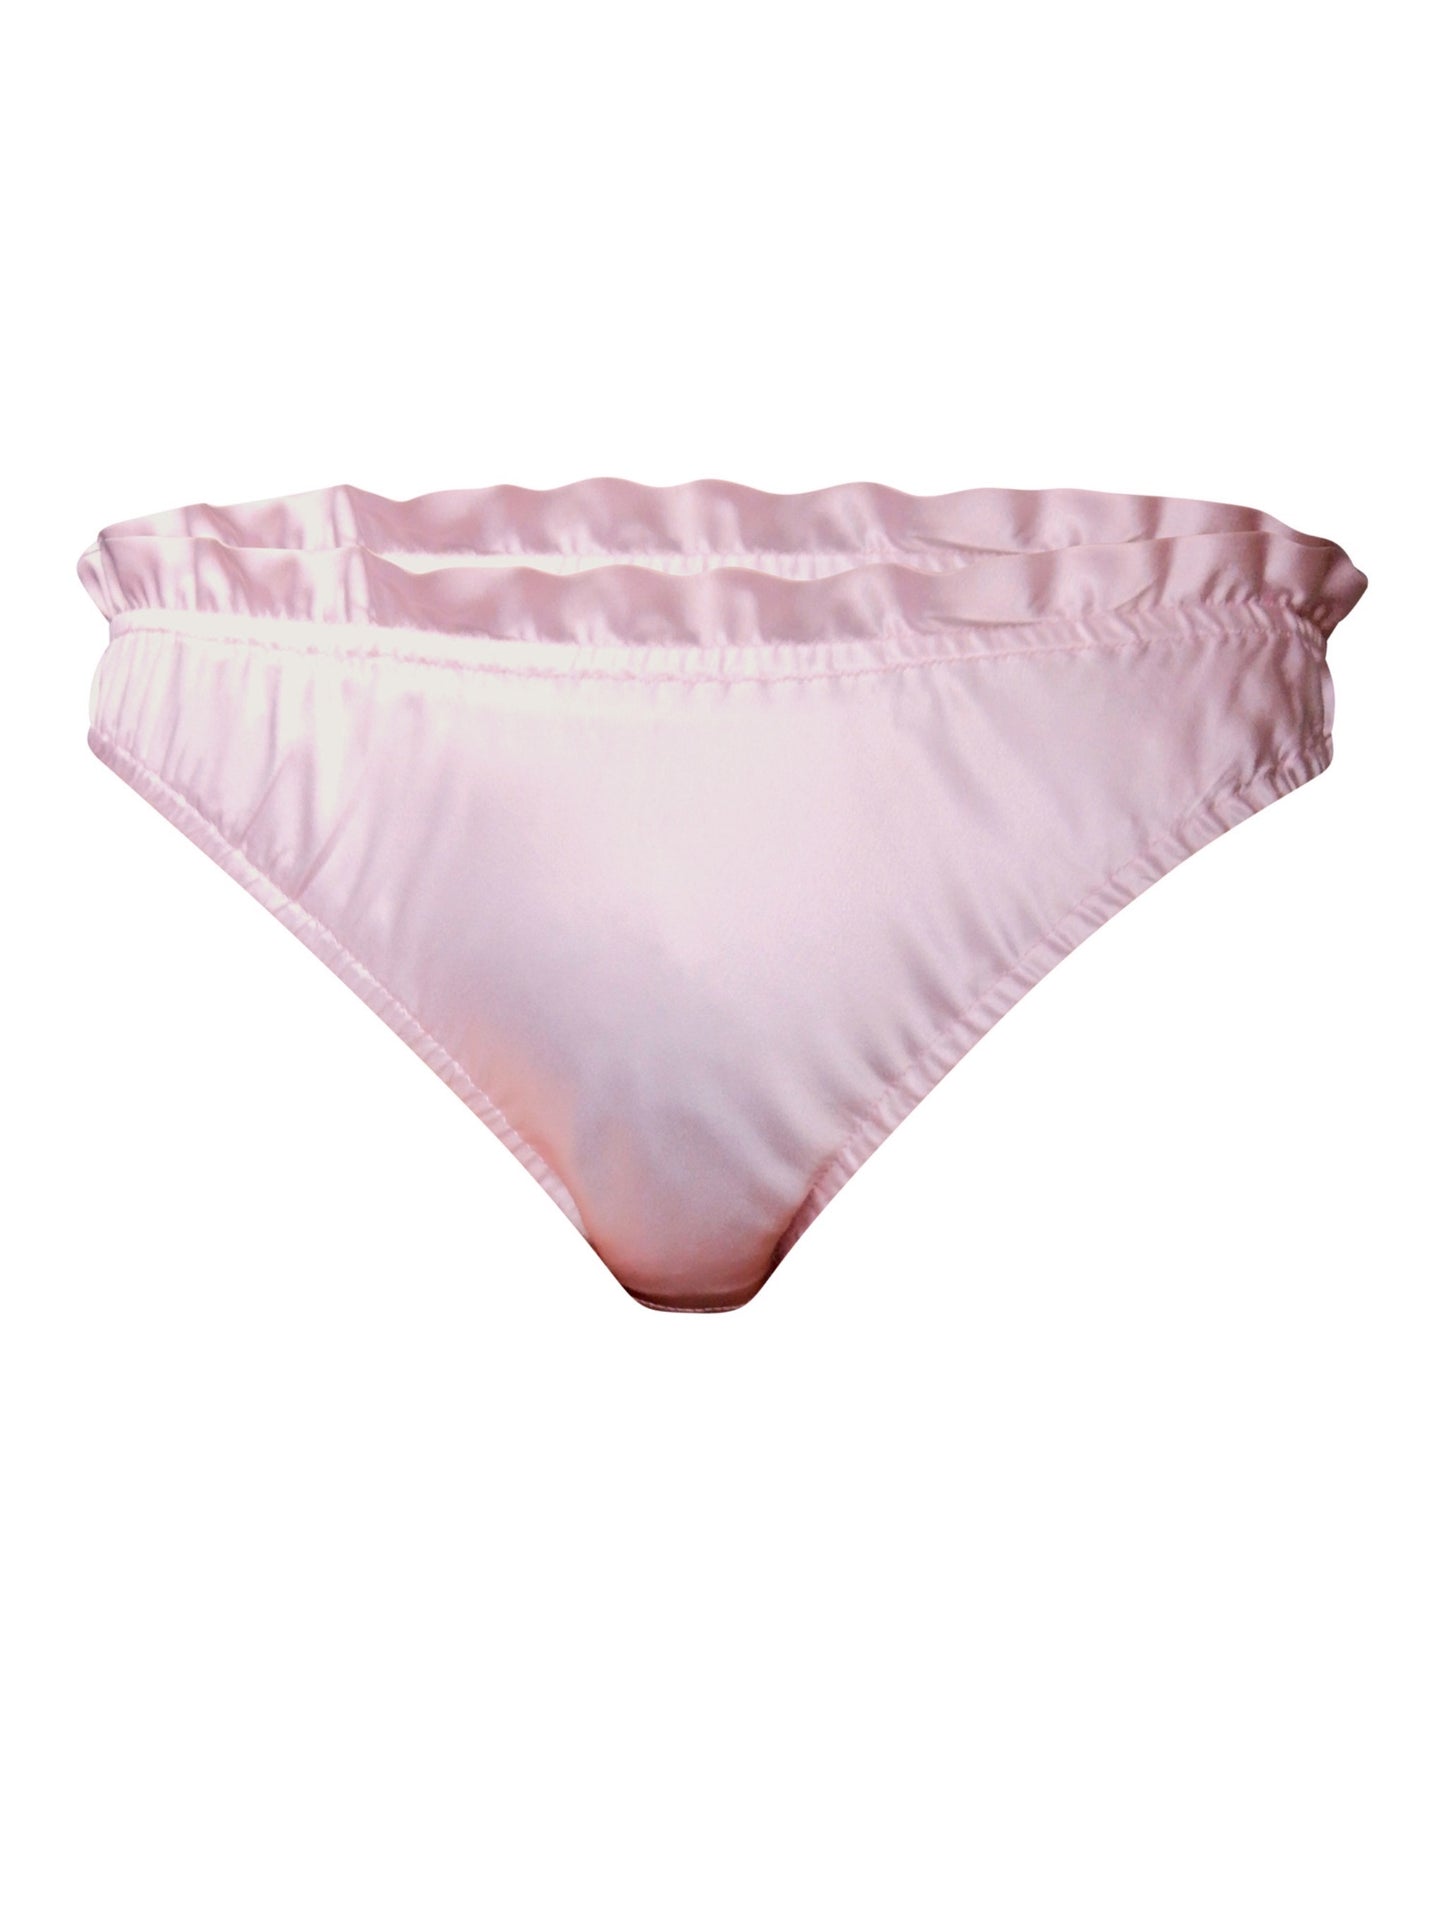 Knickers with ruffles